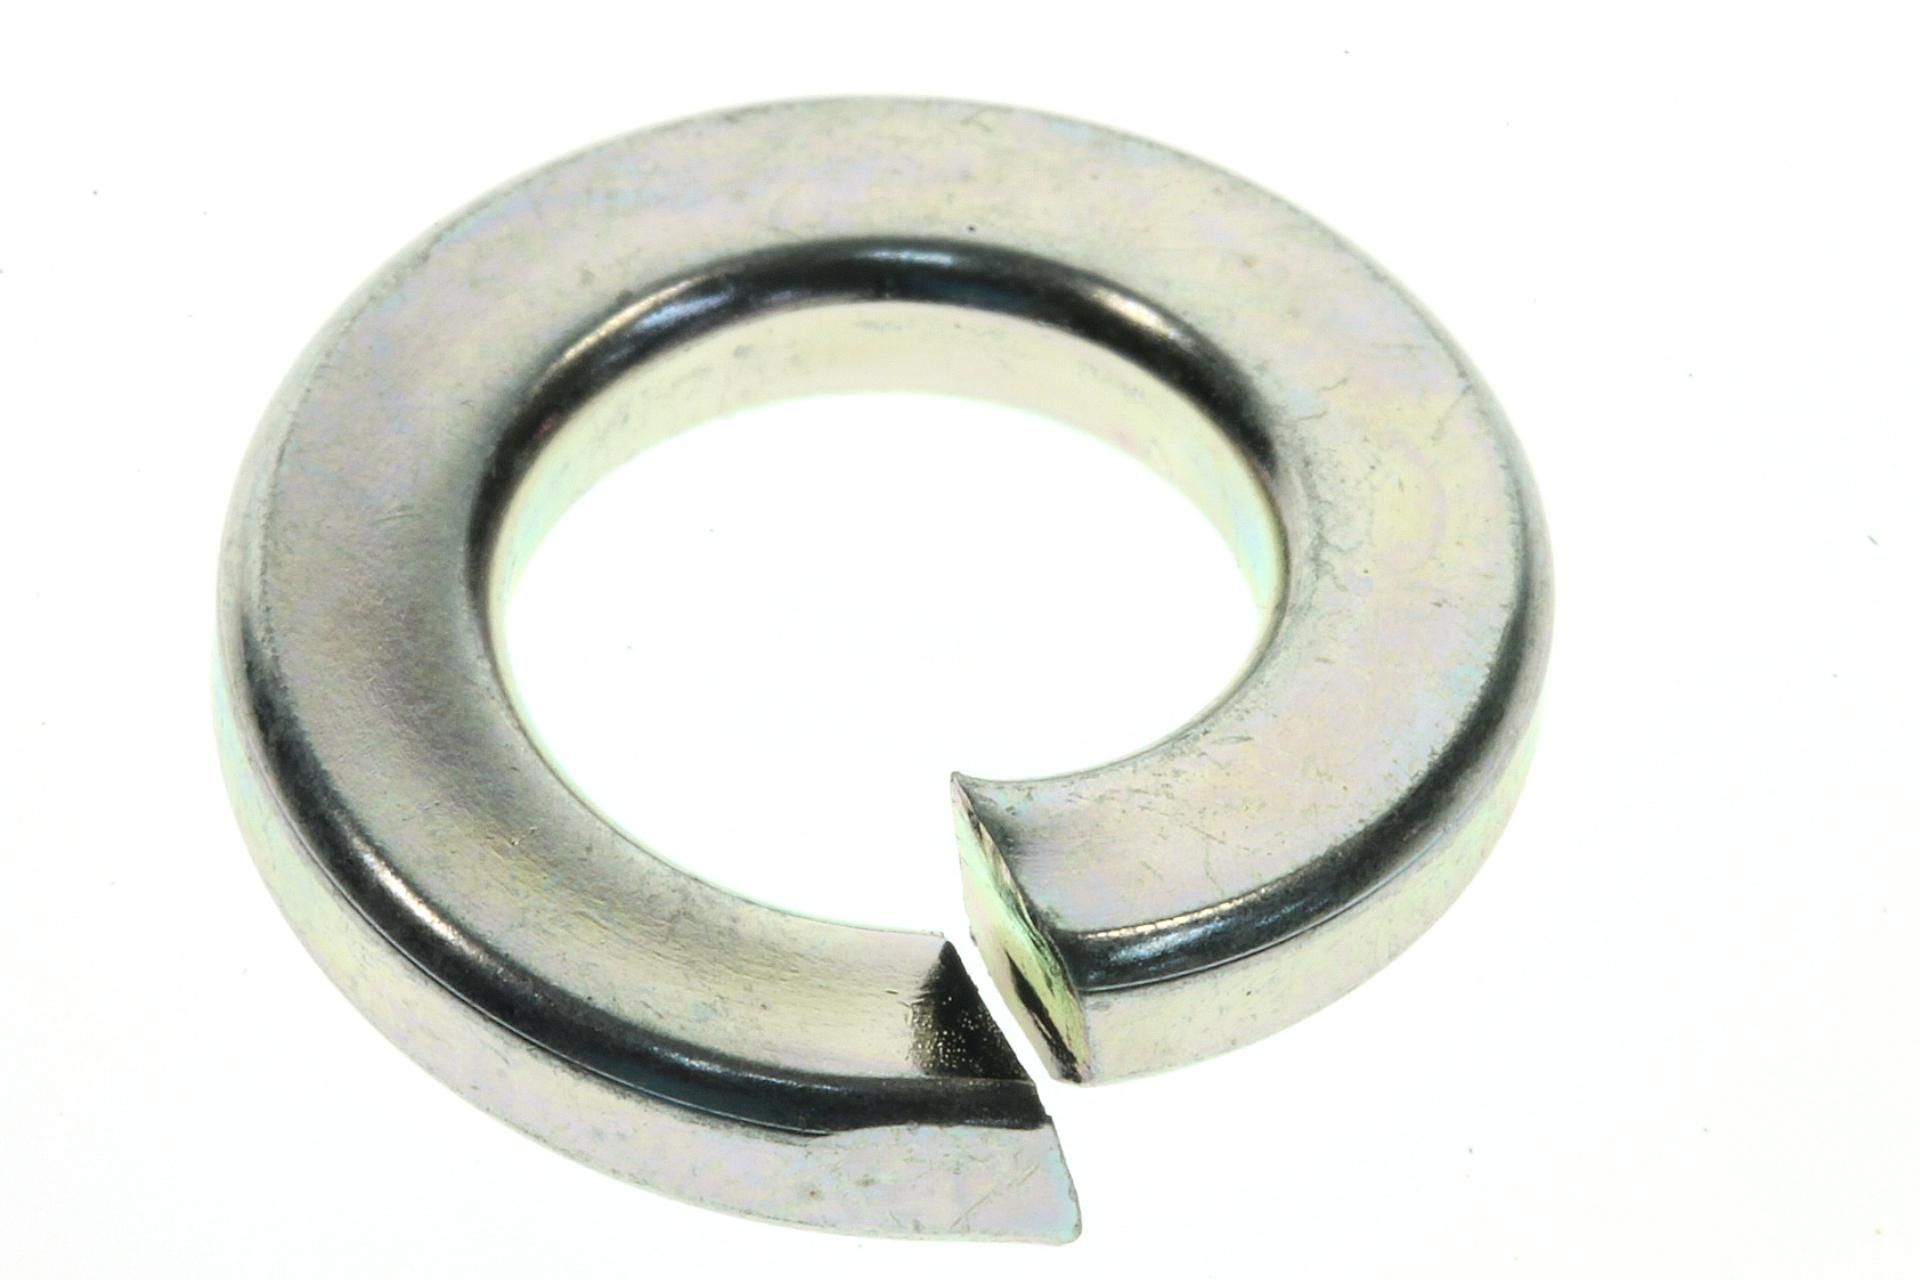 08321-01103 Superseded by 08321-0110A - WASHER,LOCK